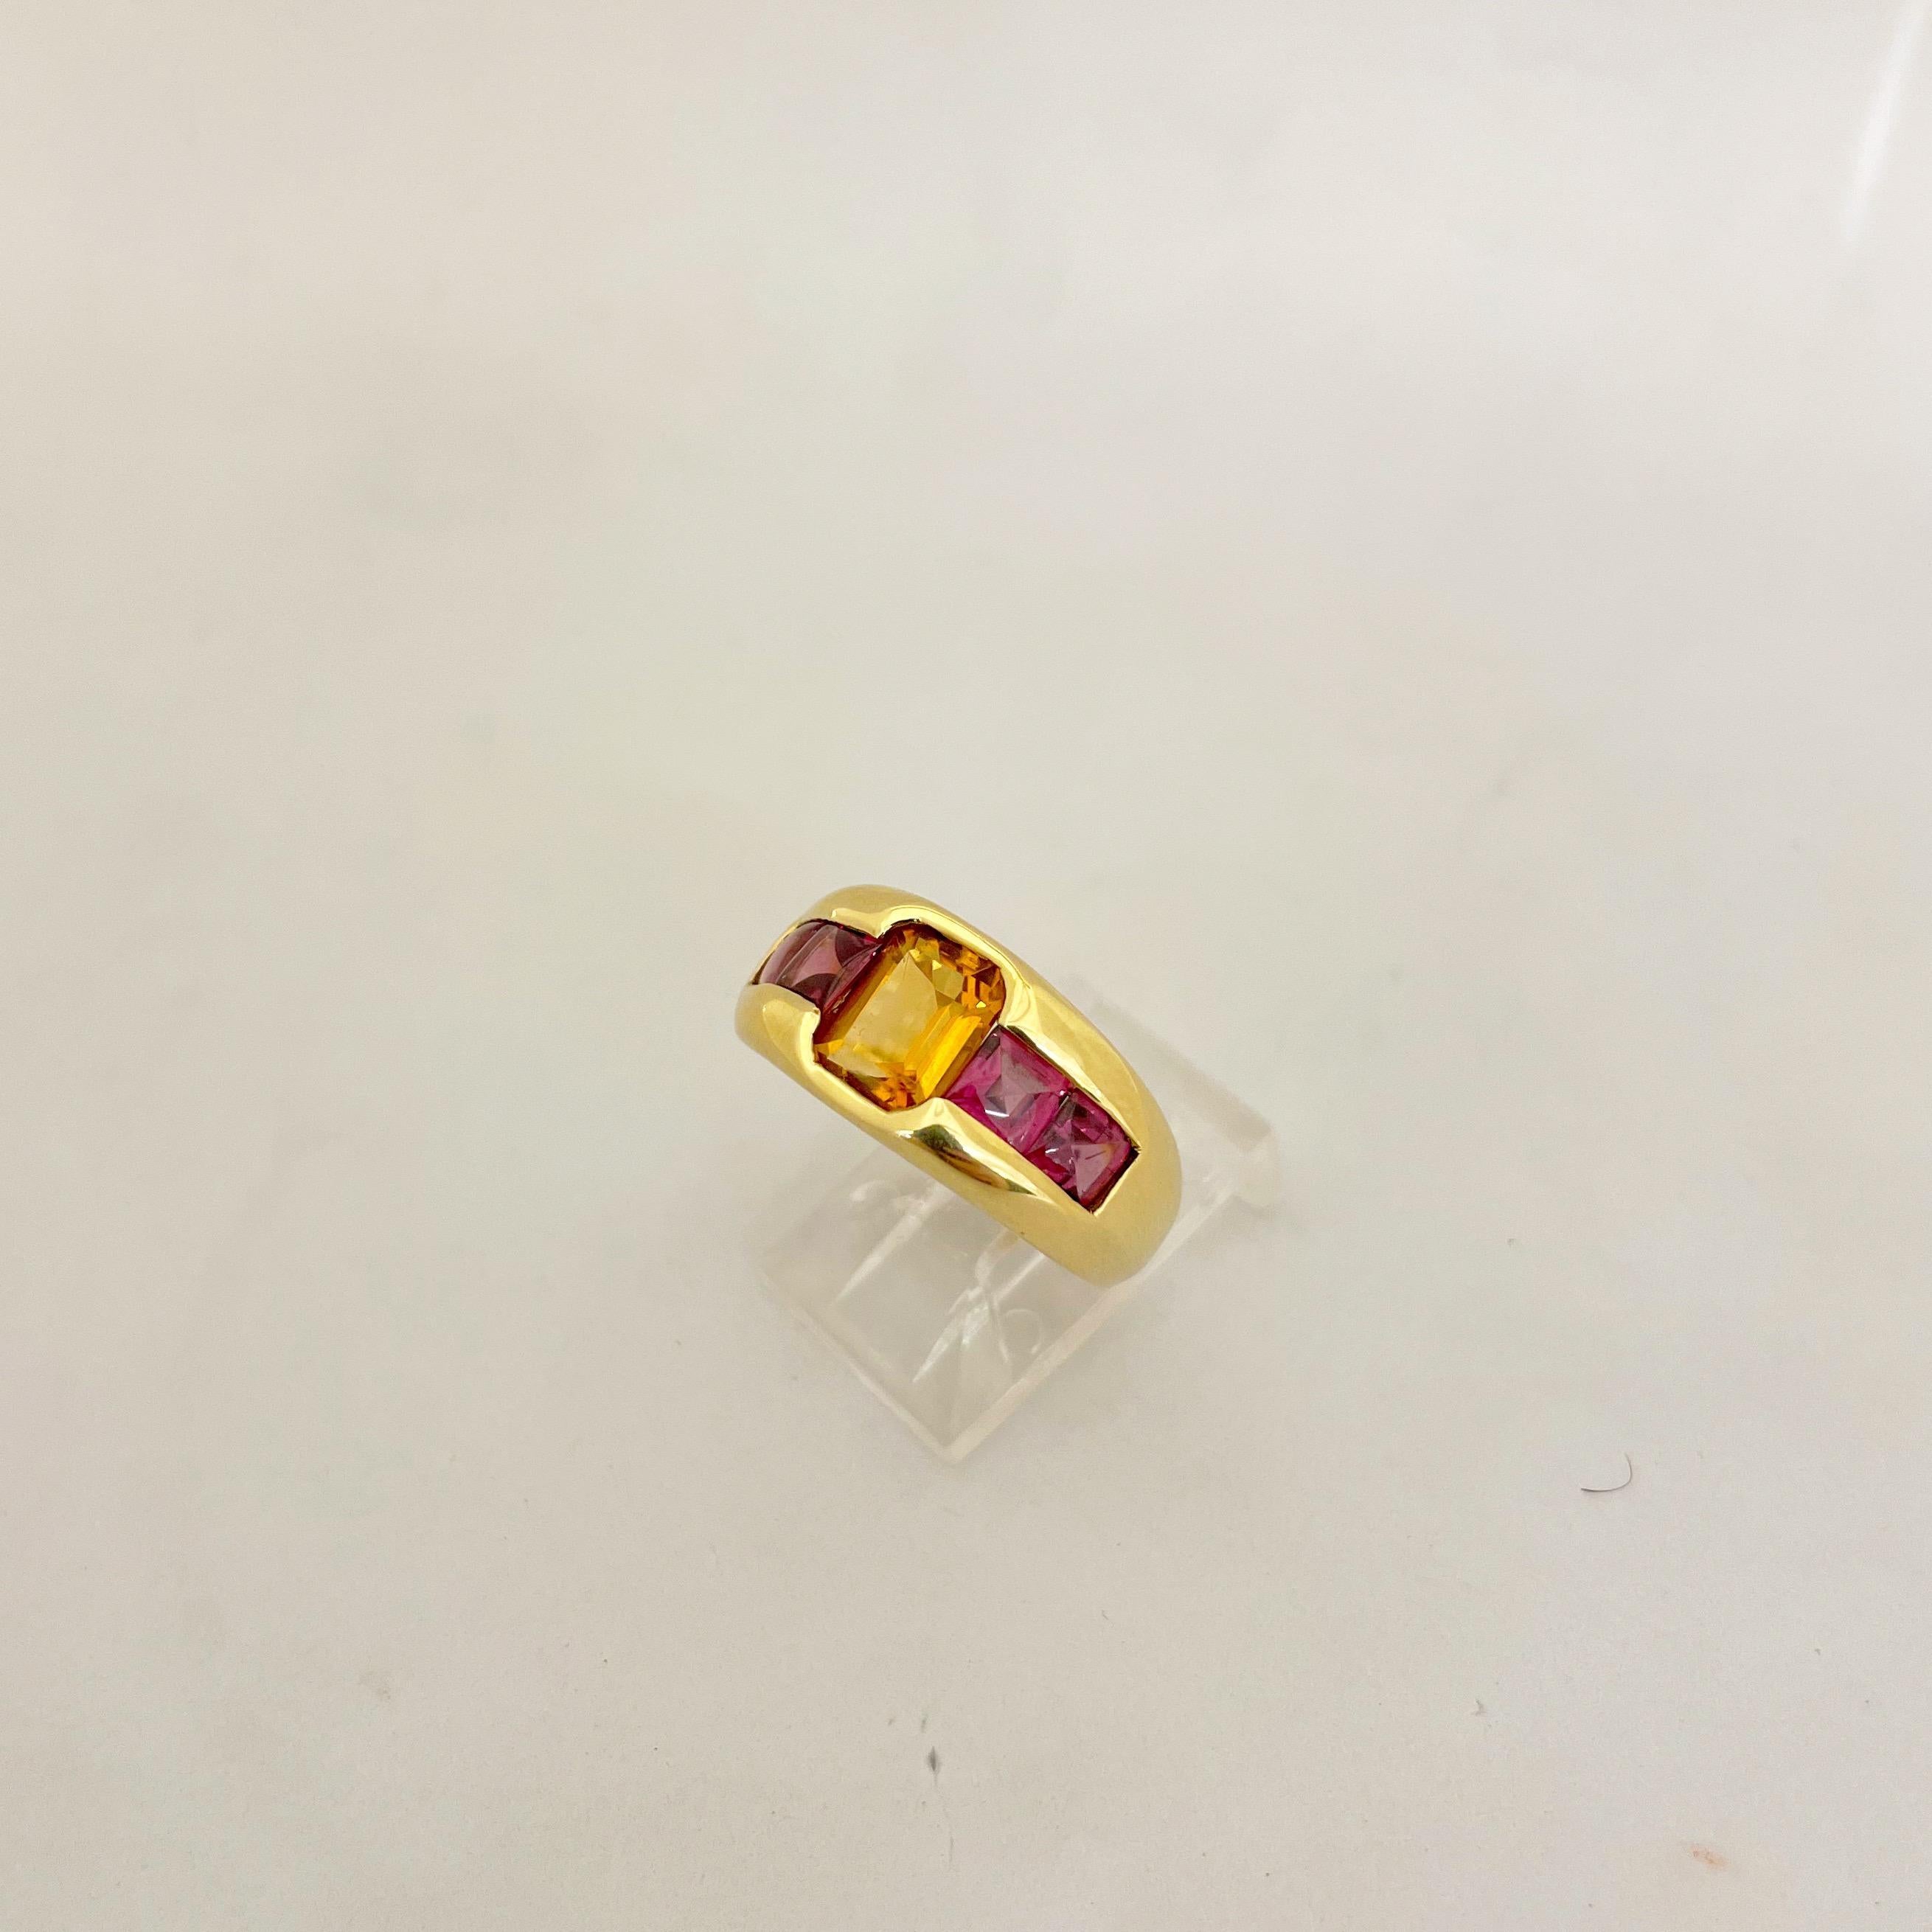 Gregg Ruth 18KT Yellow Gold Ring with 1.34Ct. Citrine Center & 1.59Ct. Rhodolite For Sale 3